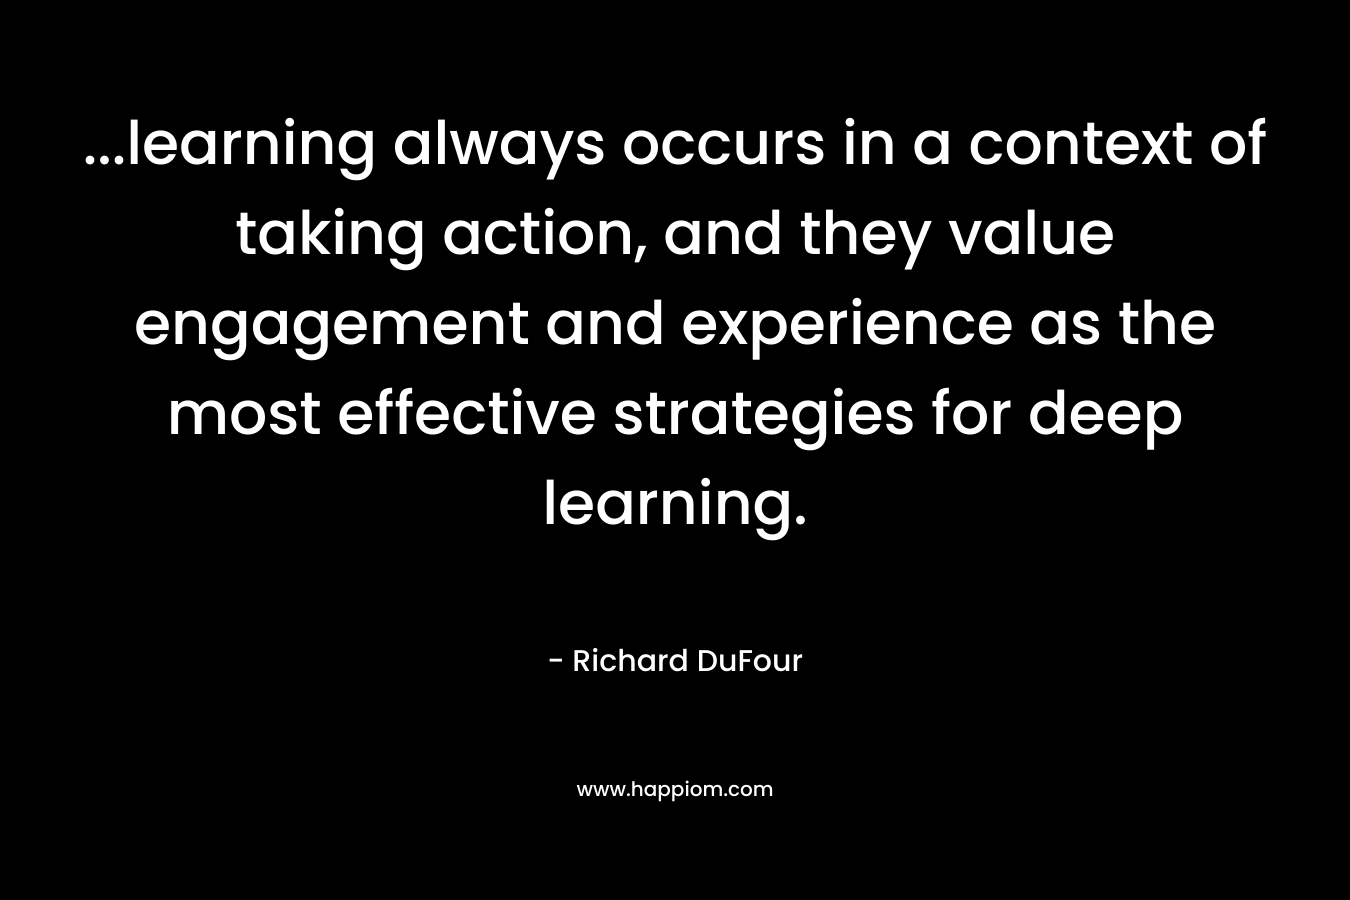 ...learning always occurs in a context of taking action, and they value engagement and experience as the most effective strategies for deep learning.